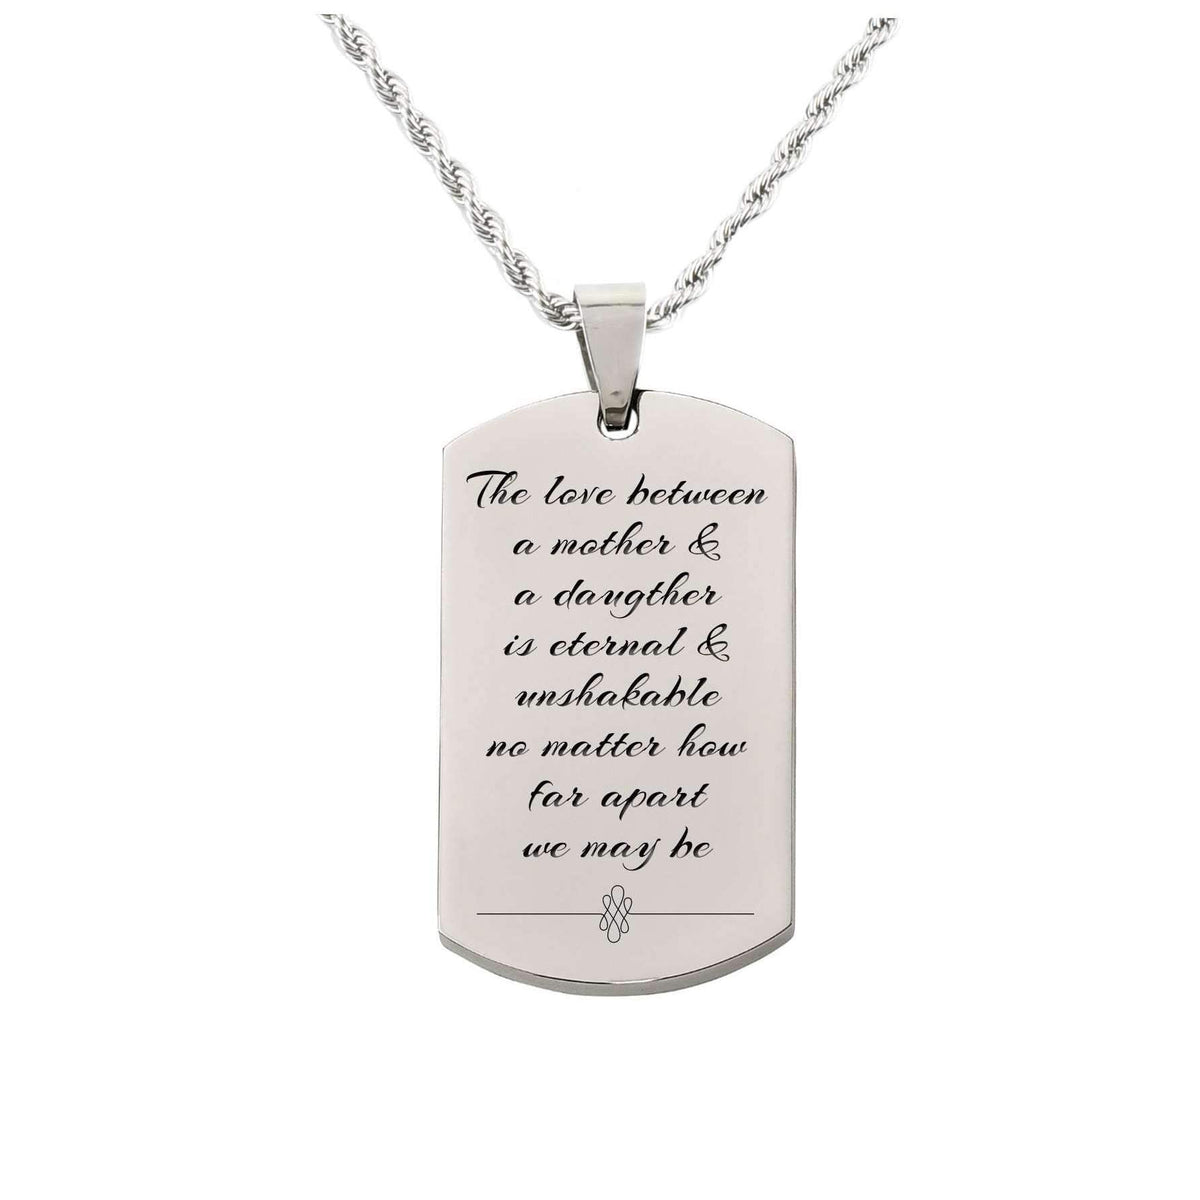 Jewelry & Watches Love Between Mother Tag Necklace